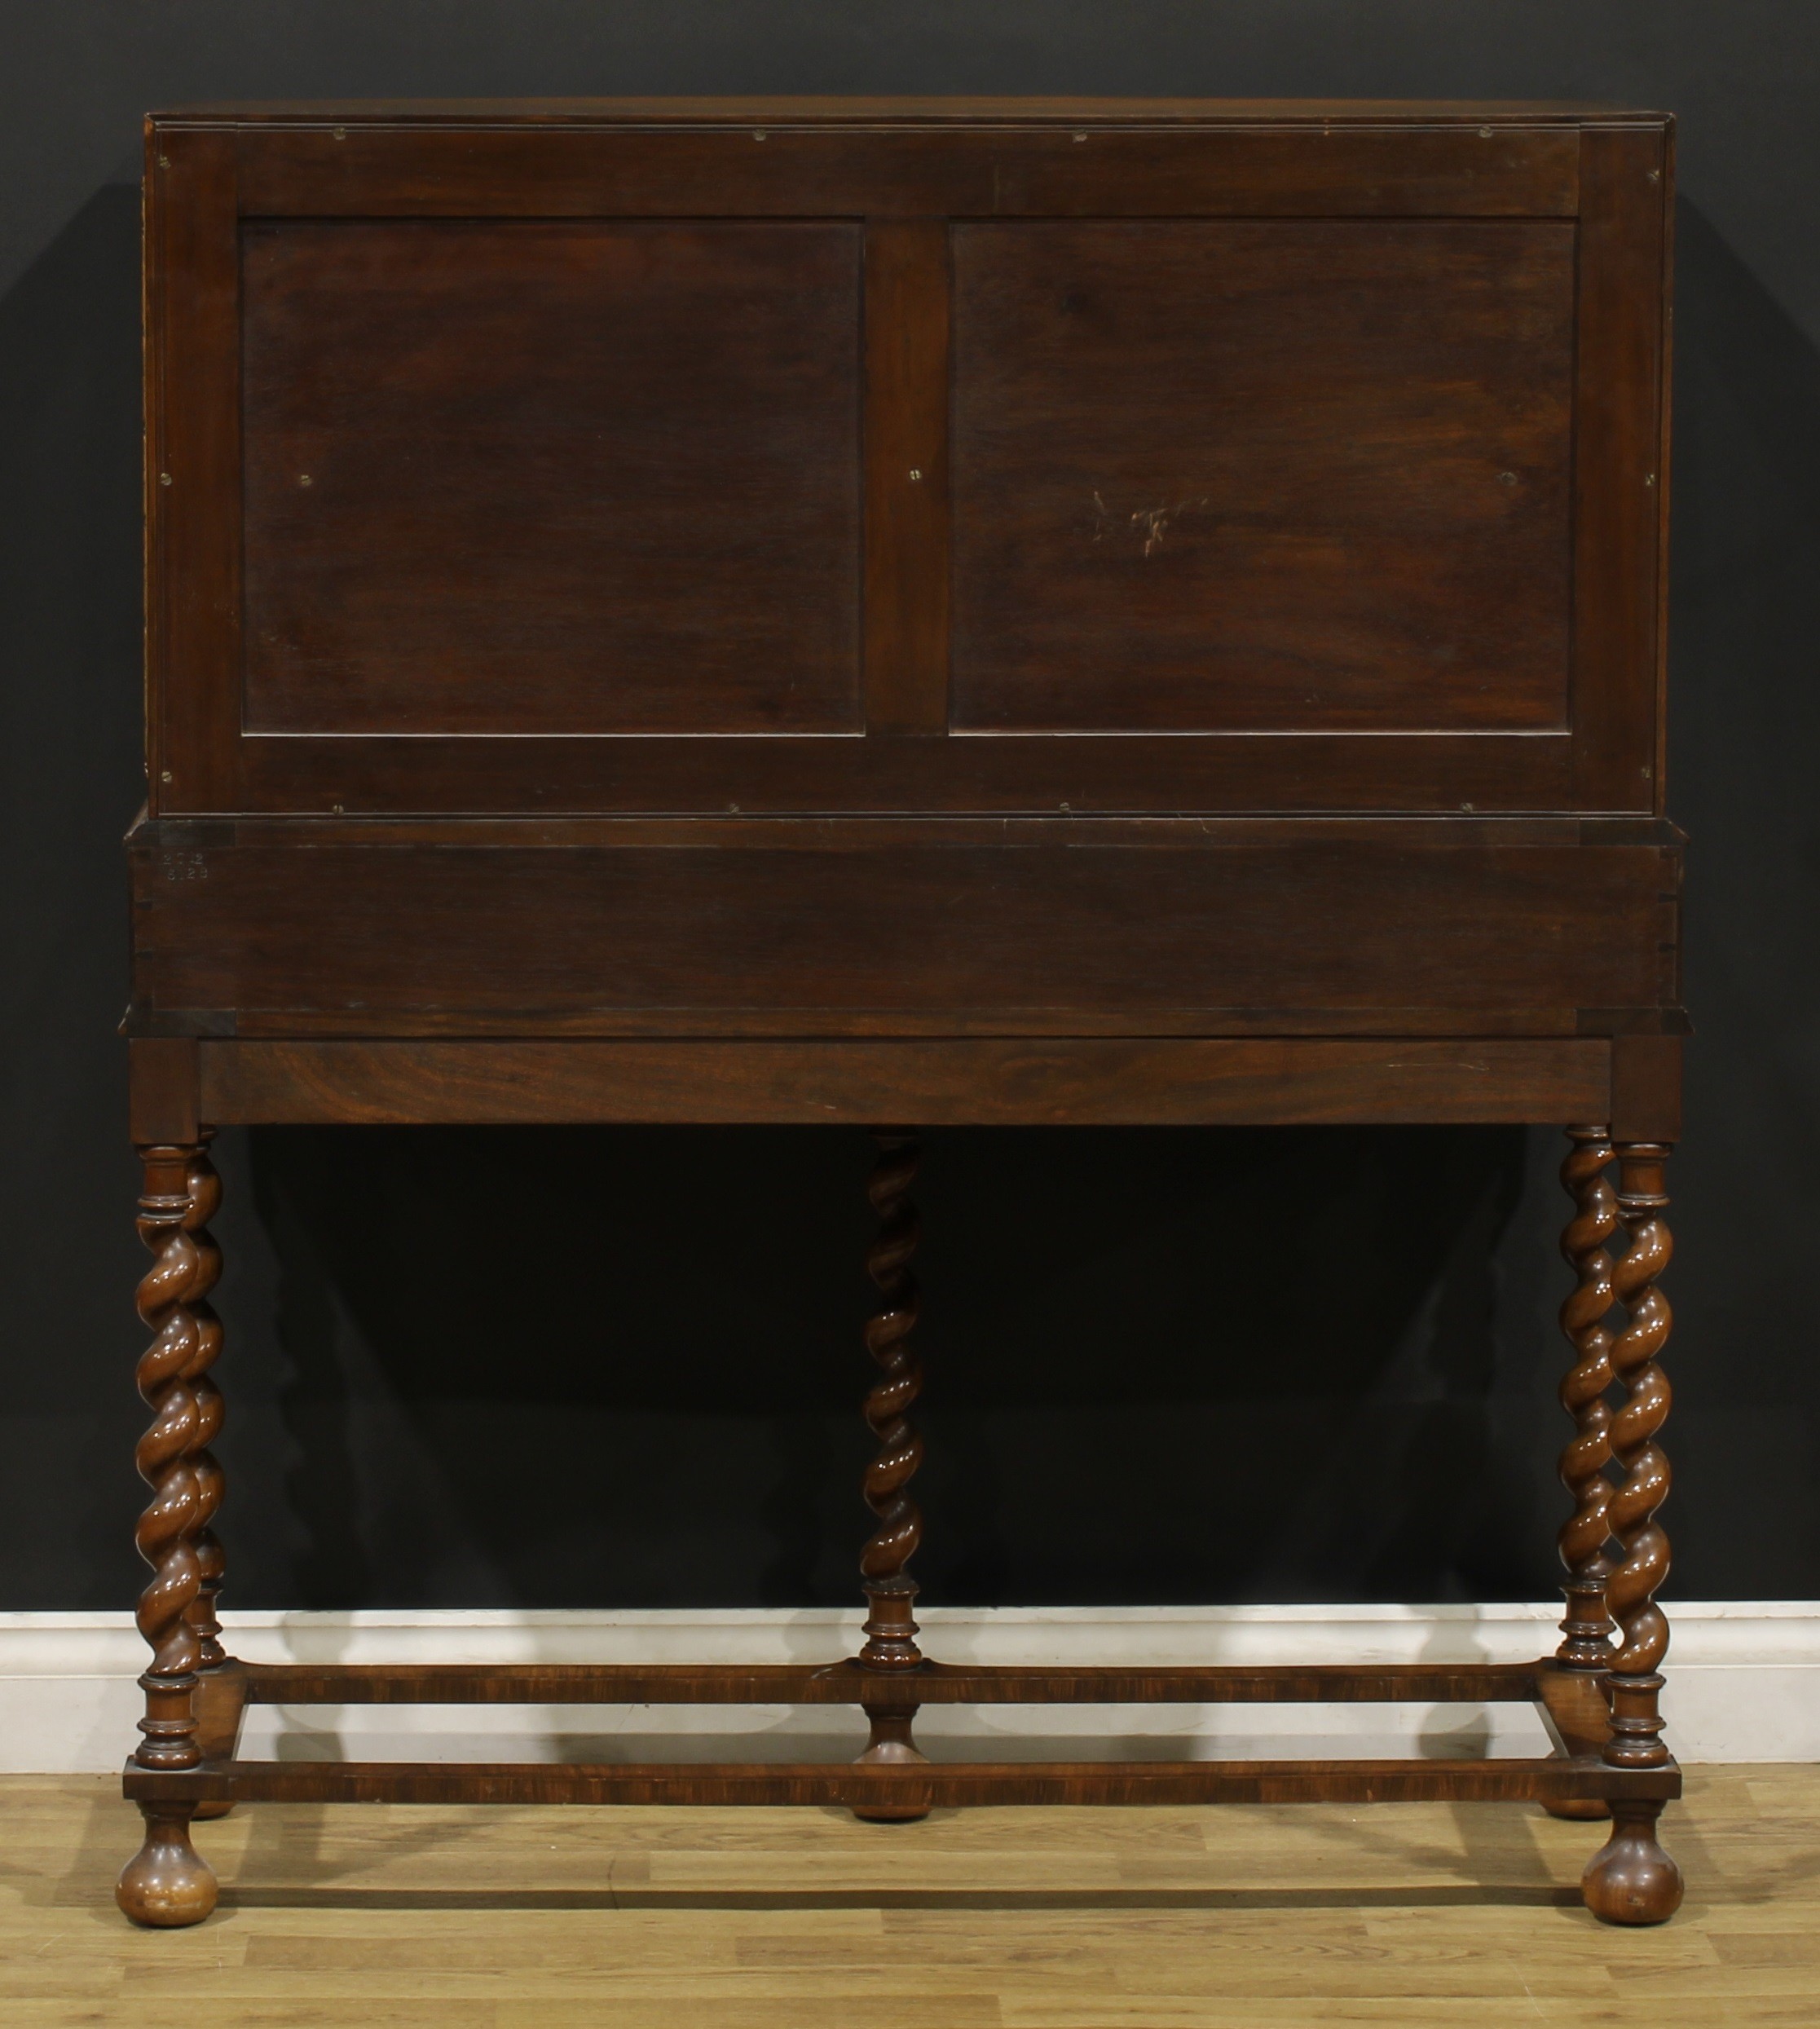 An early 20th century Queen Anne style walnut bookcase or display cabinet, by Hamptons, Pall Mall - Image 6 of 7